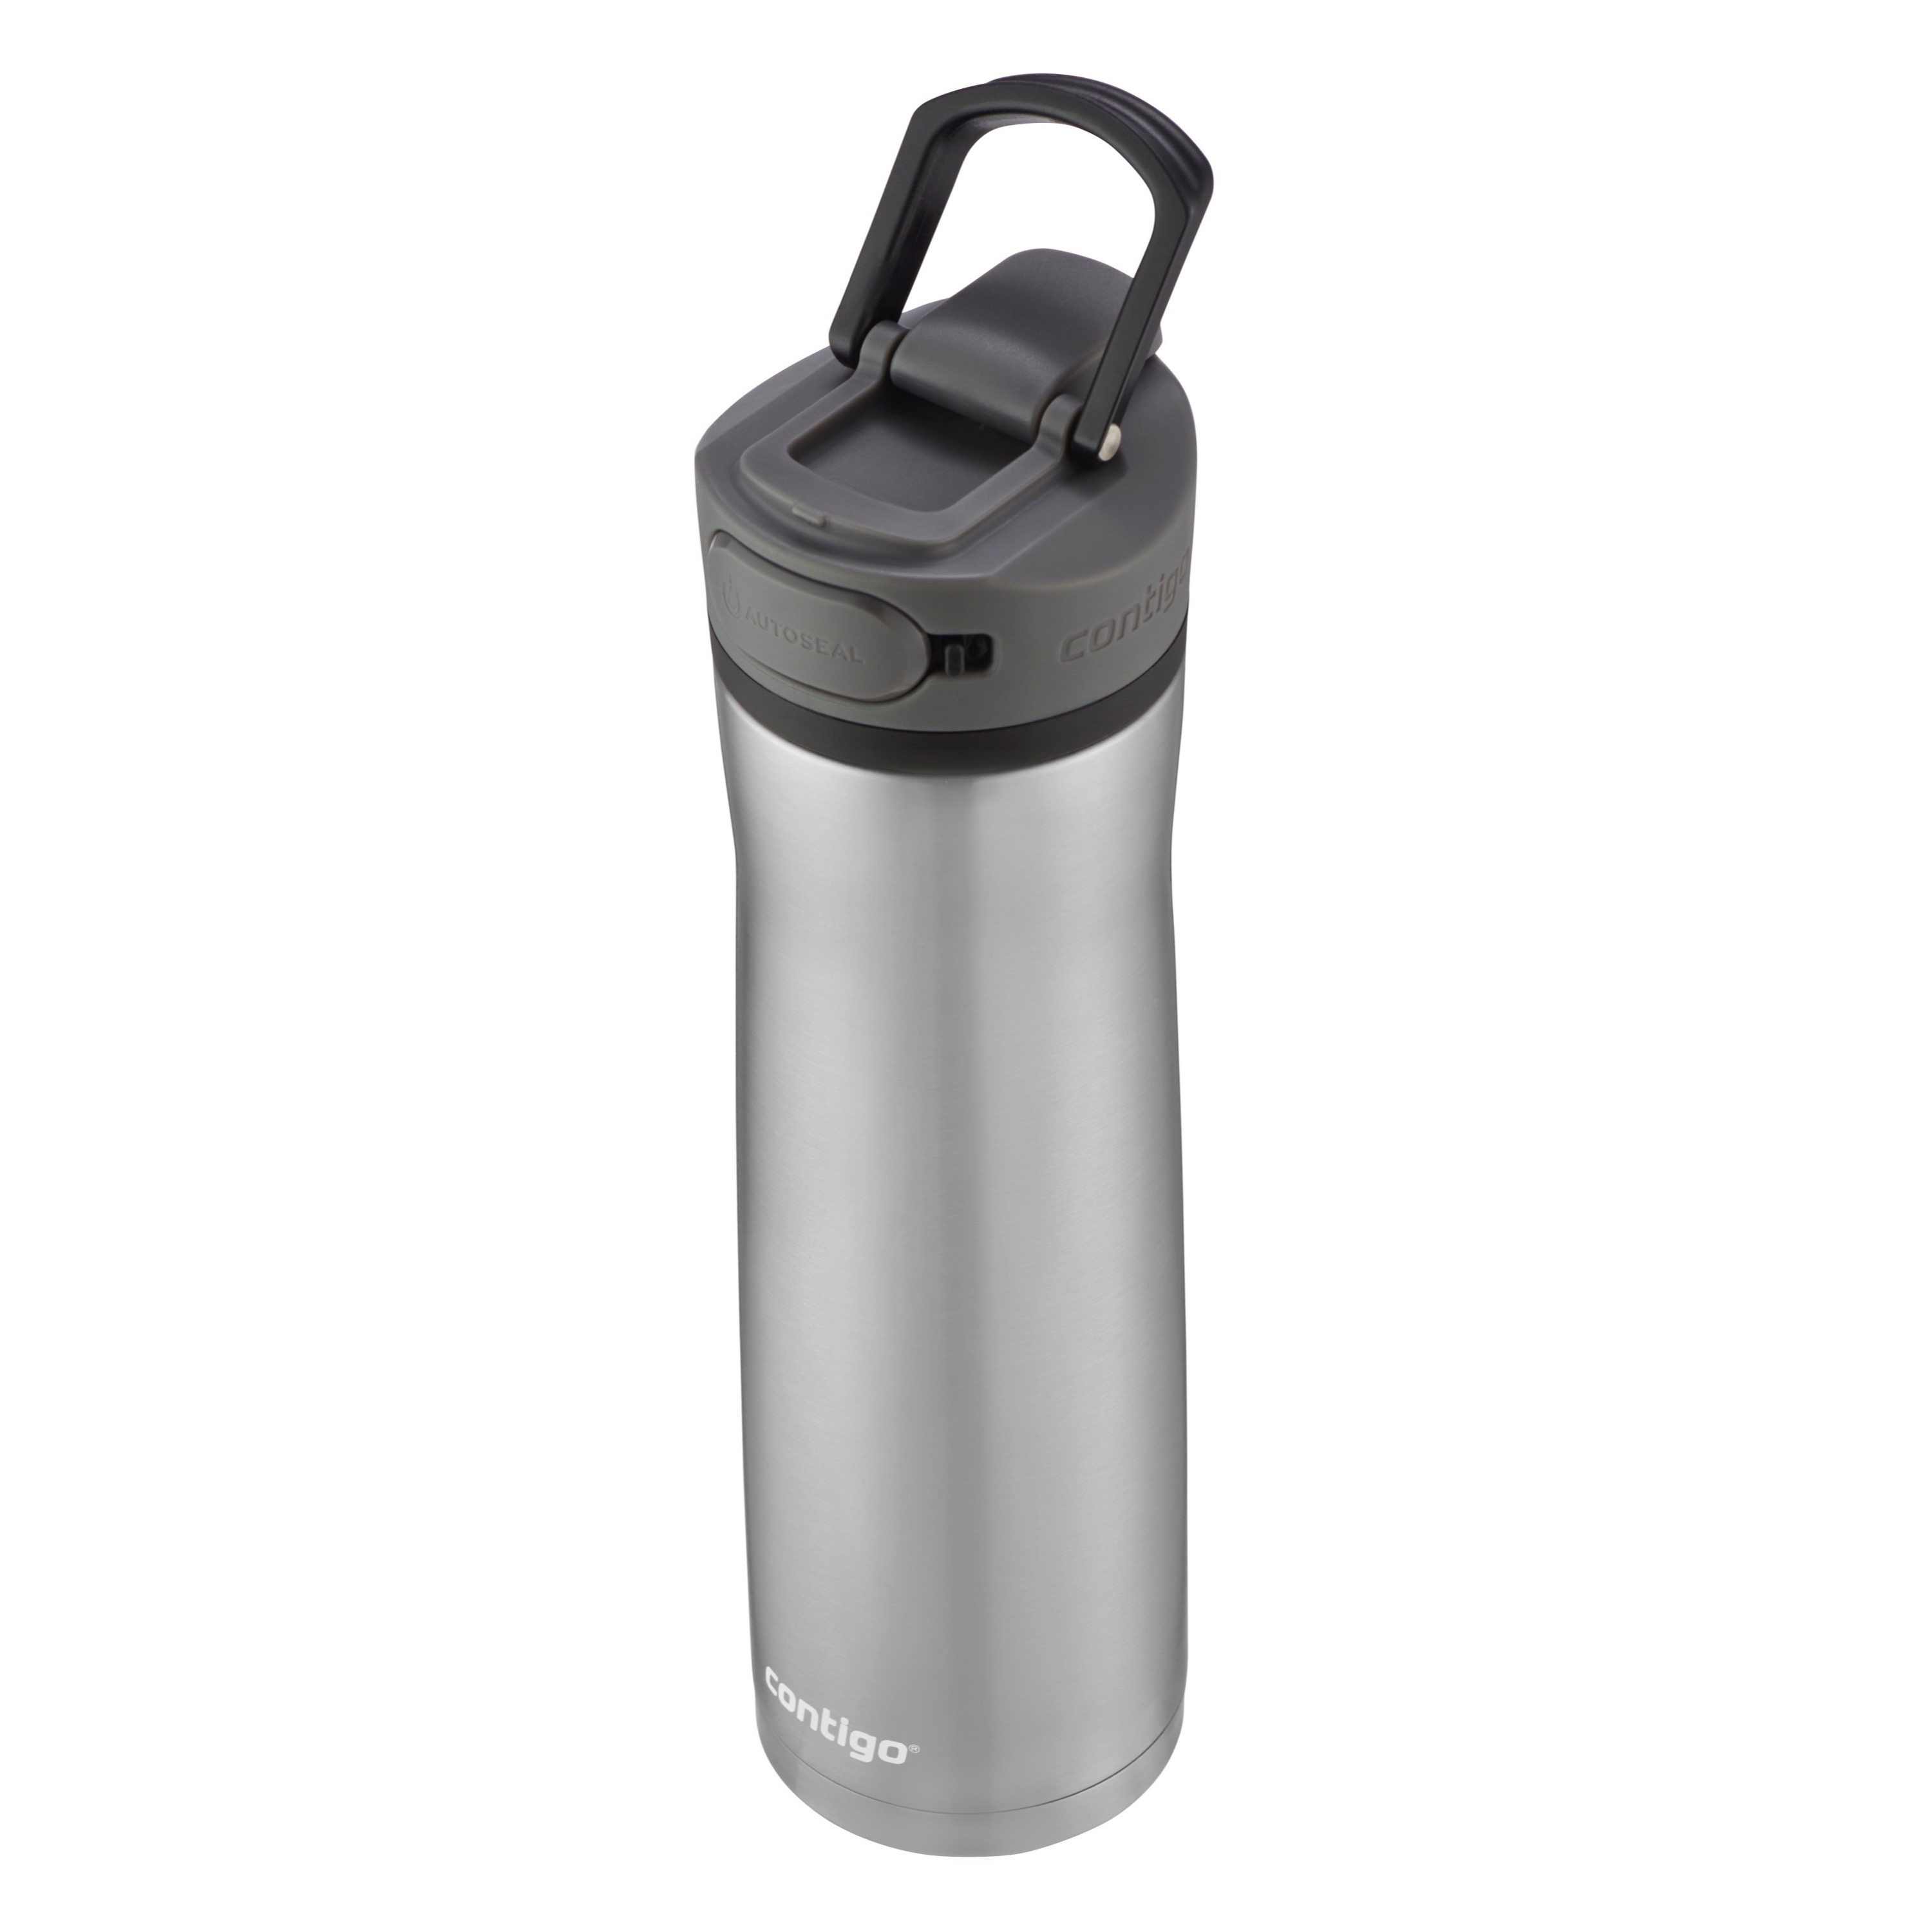 Contigo Cortland Chill 2.0 24 oz Silver, Gray and Licorice Solid Print Double Wall Vacuum Insulated Stainless Steel Water Bottle with Wide Mouth Lid - image 4 of 9